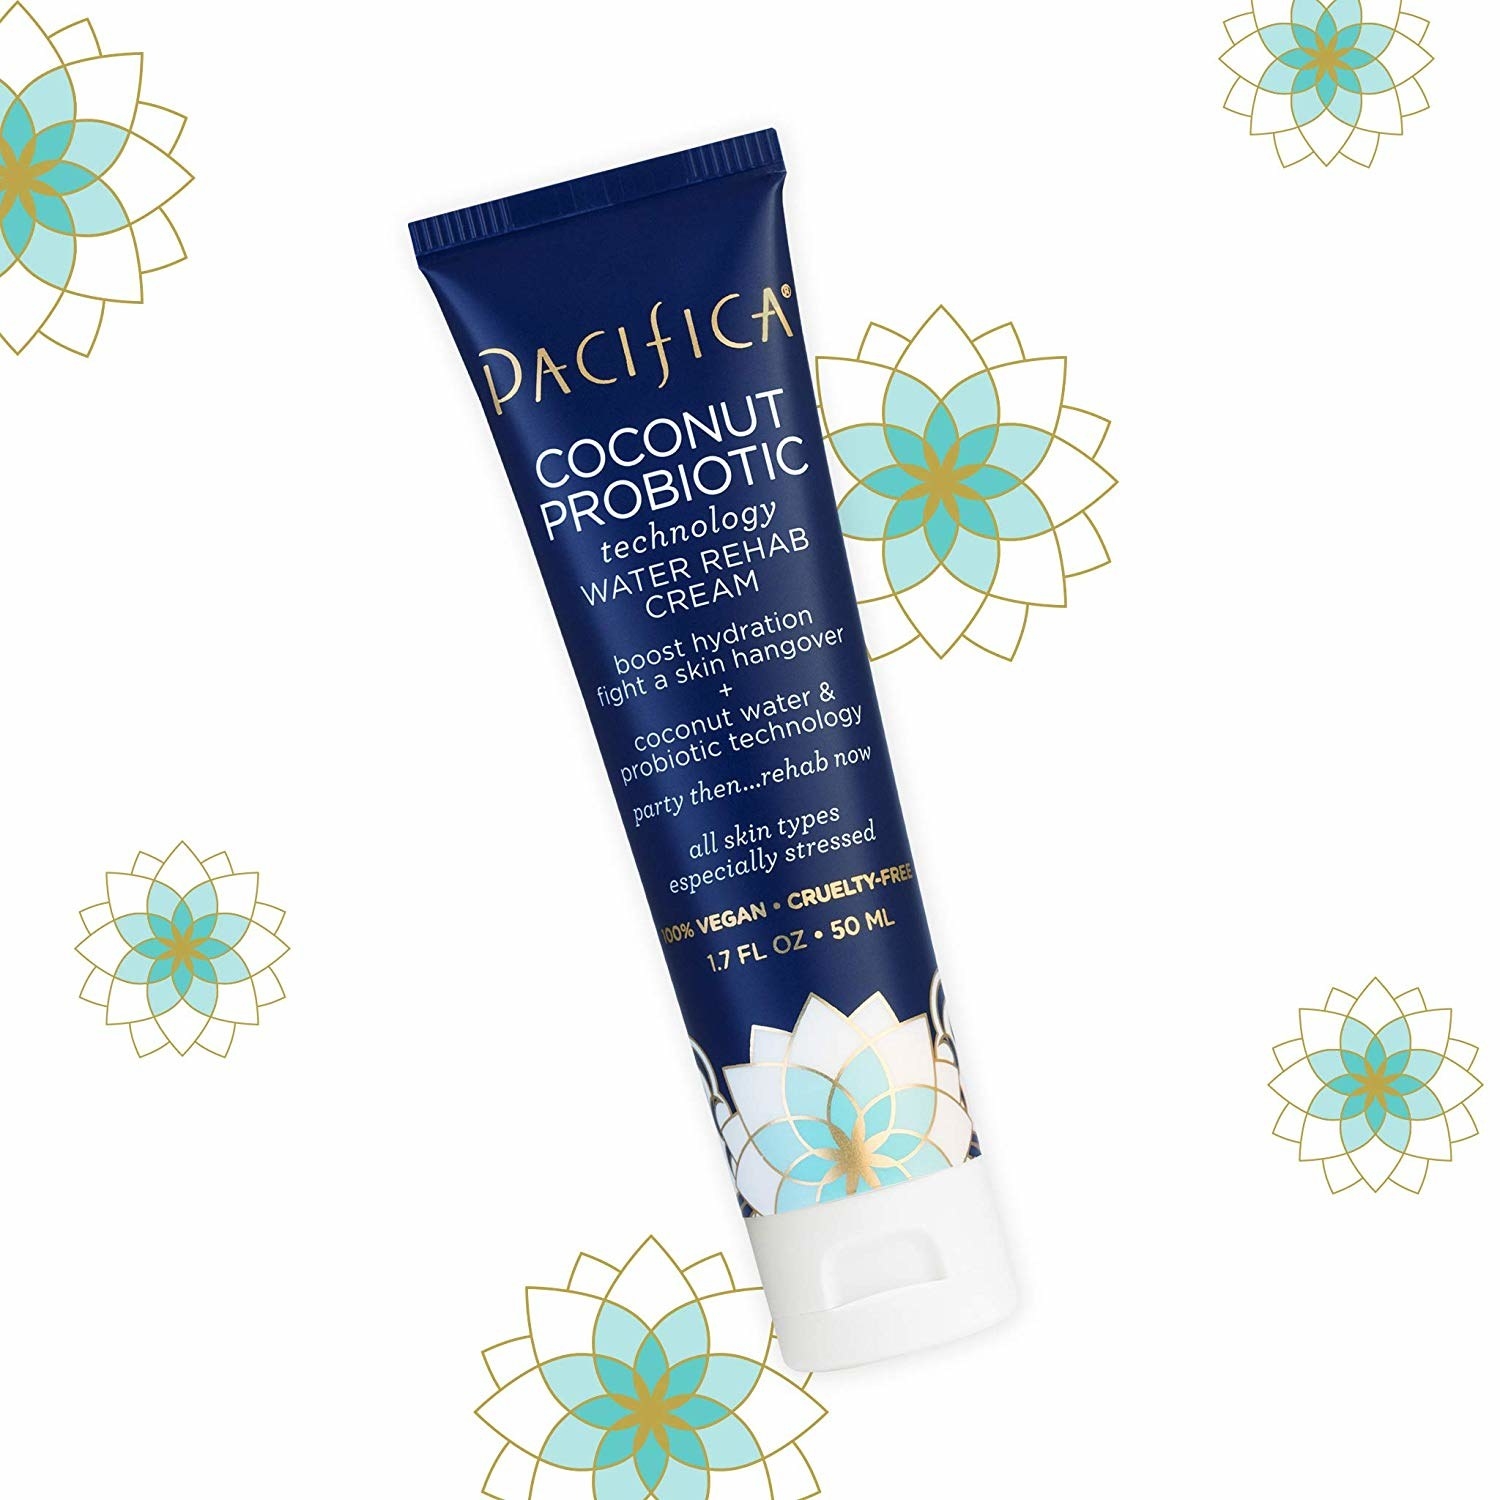 The 1.7 l oz bottle of Pacifica Coconut Probiotic Technology Water Rehab Cream, for all skin types